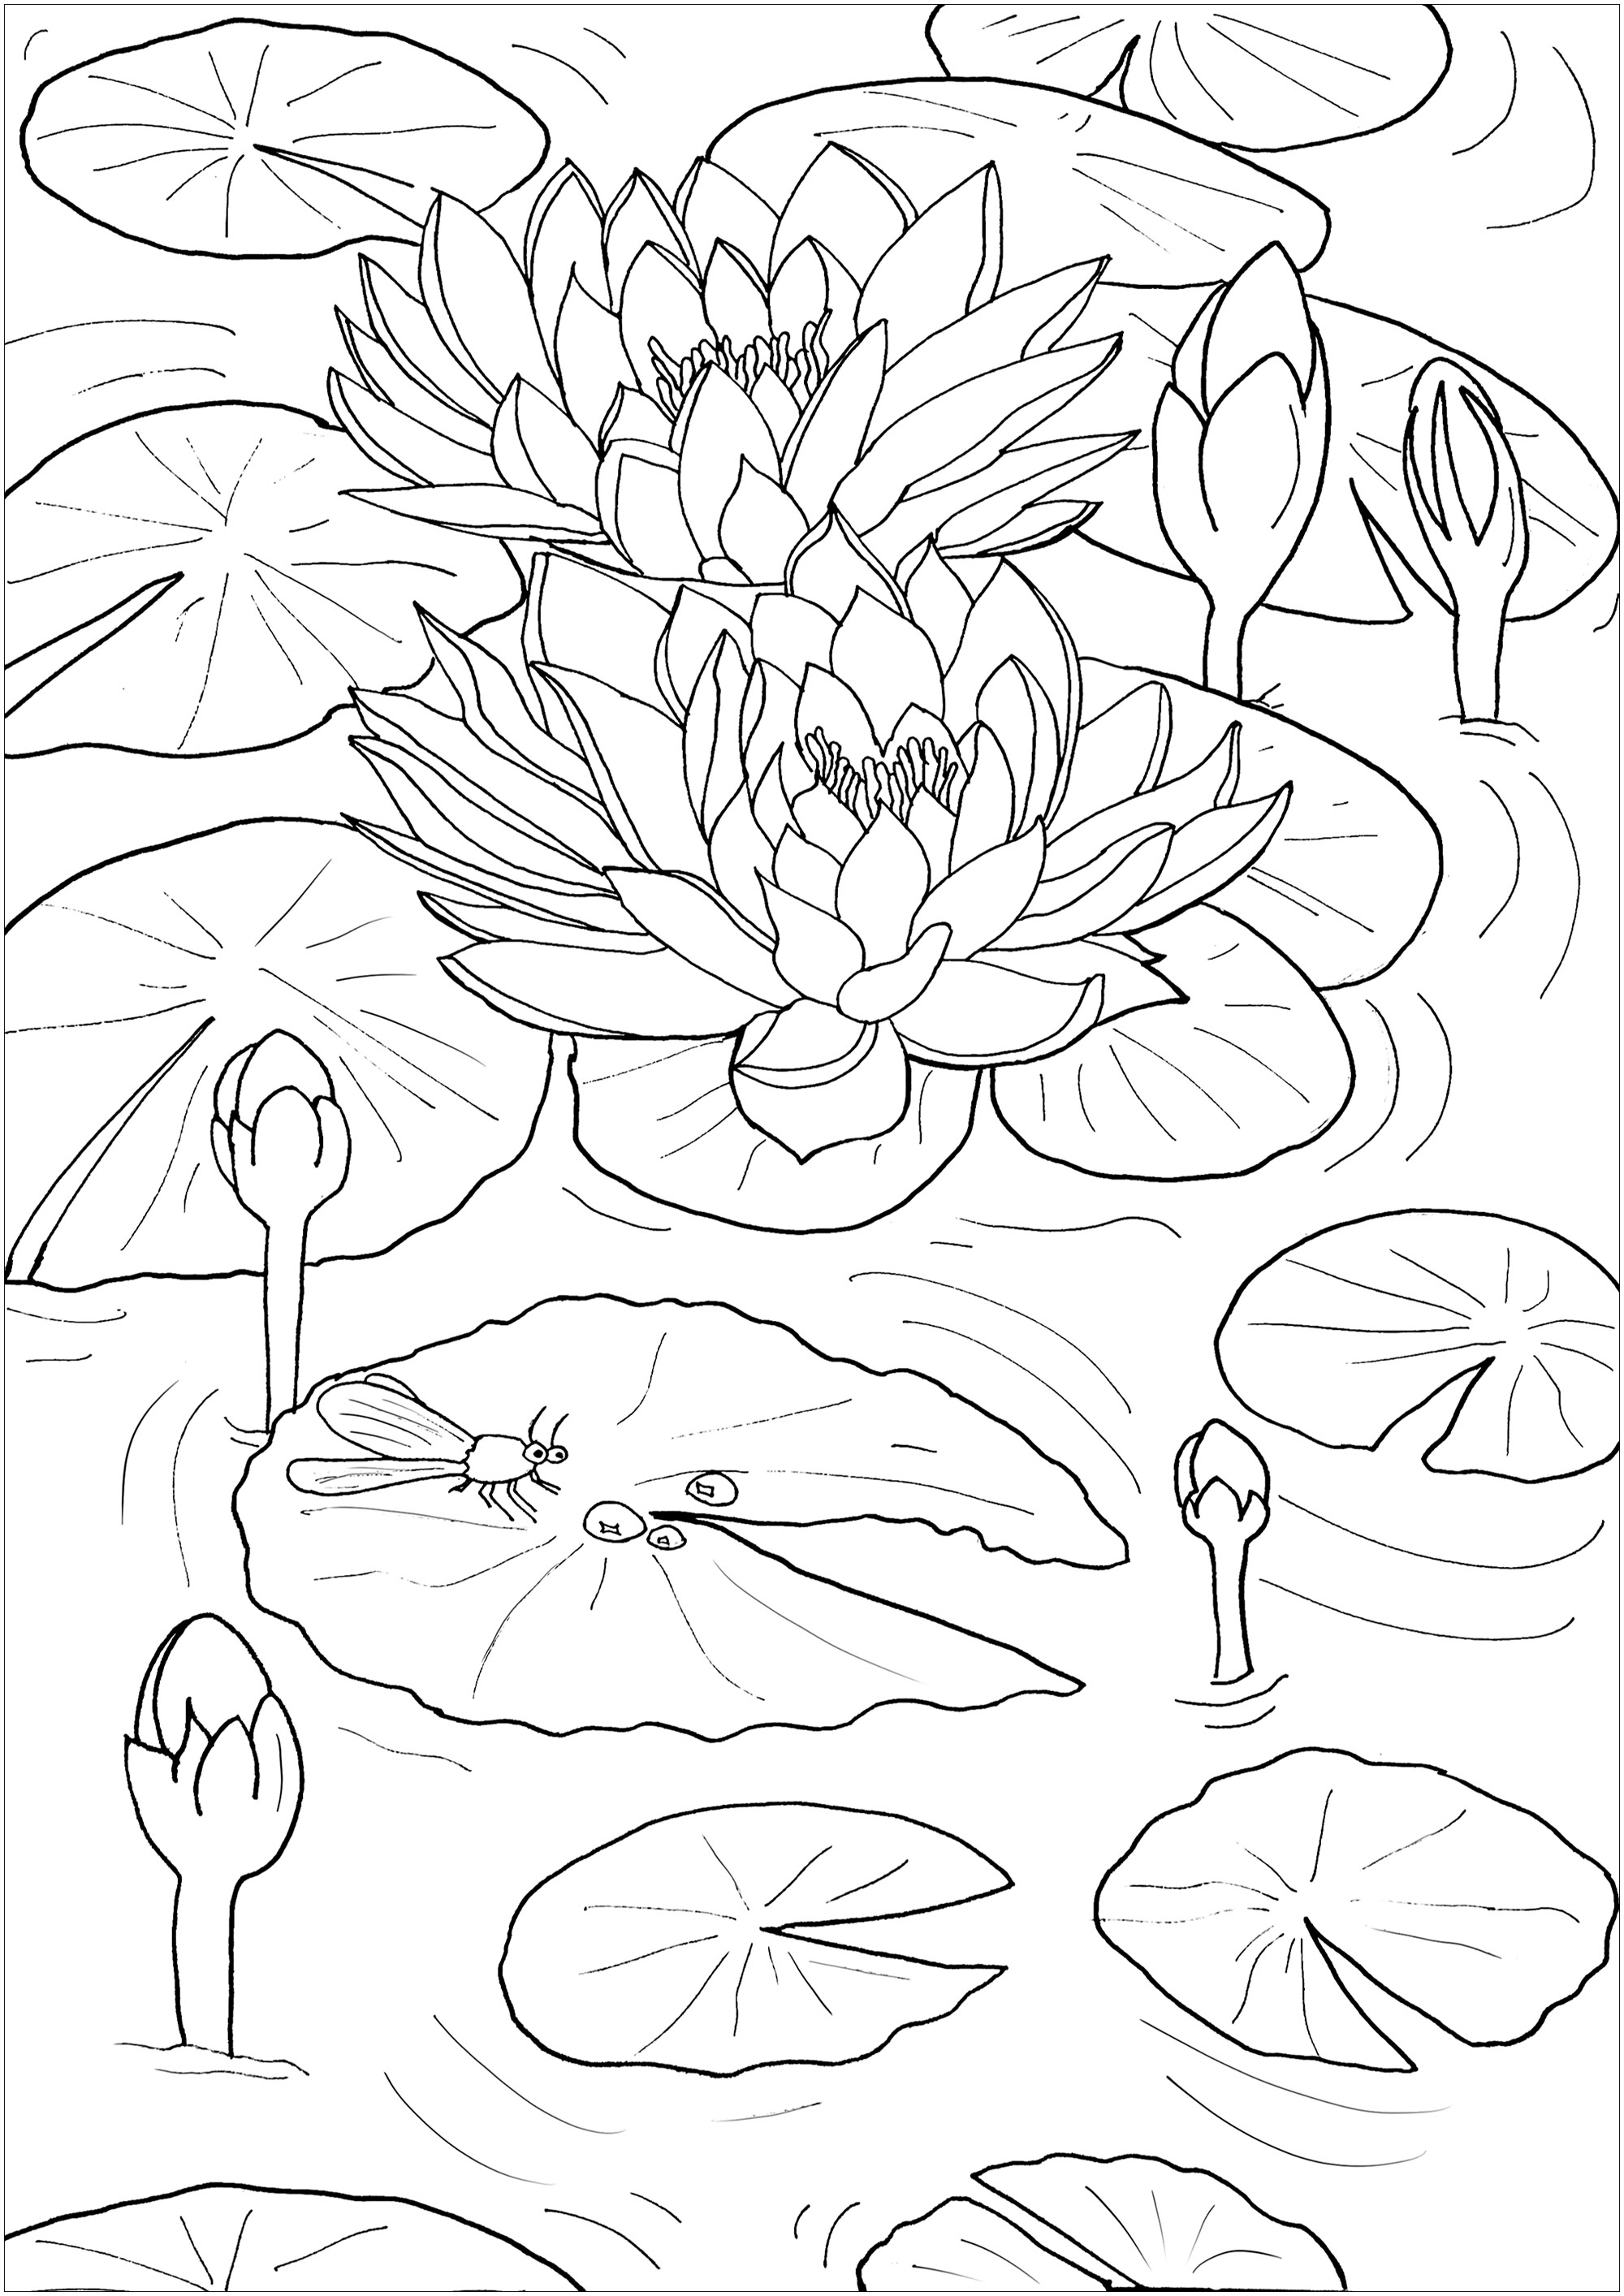 Water lilies and little dragonfly - Flowers Adult Coloring Pages